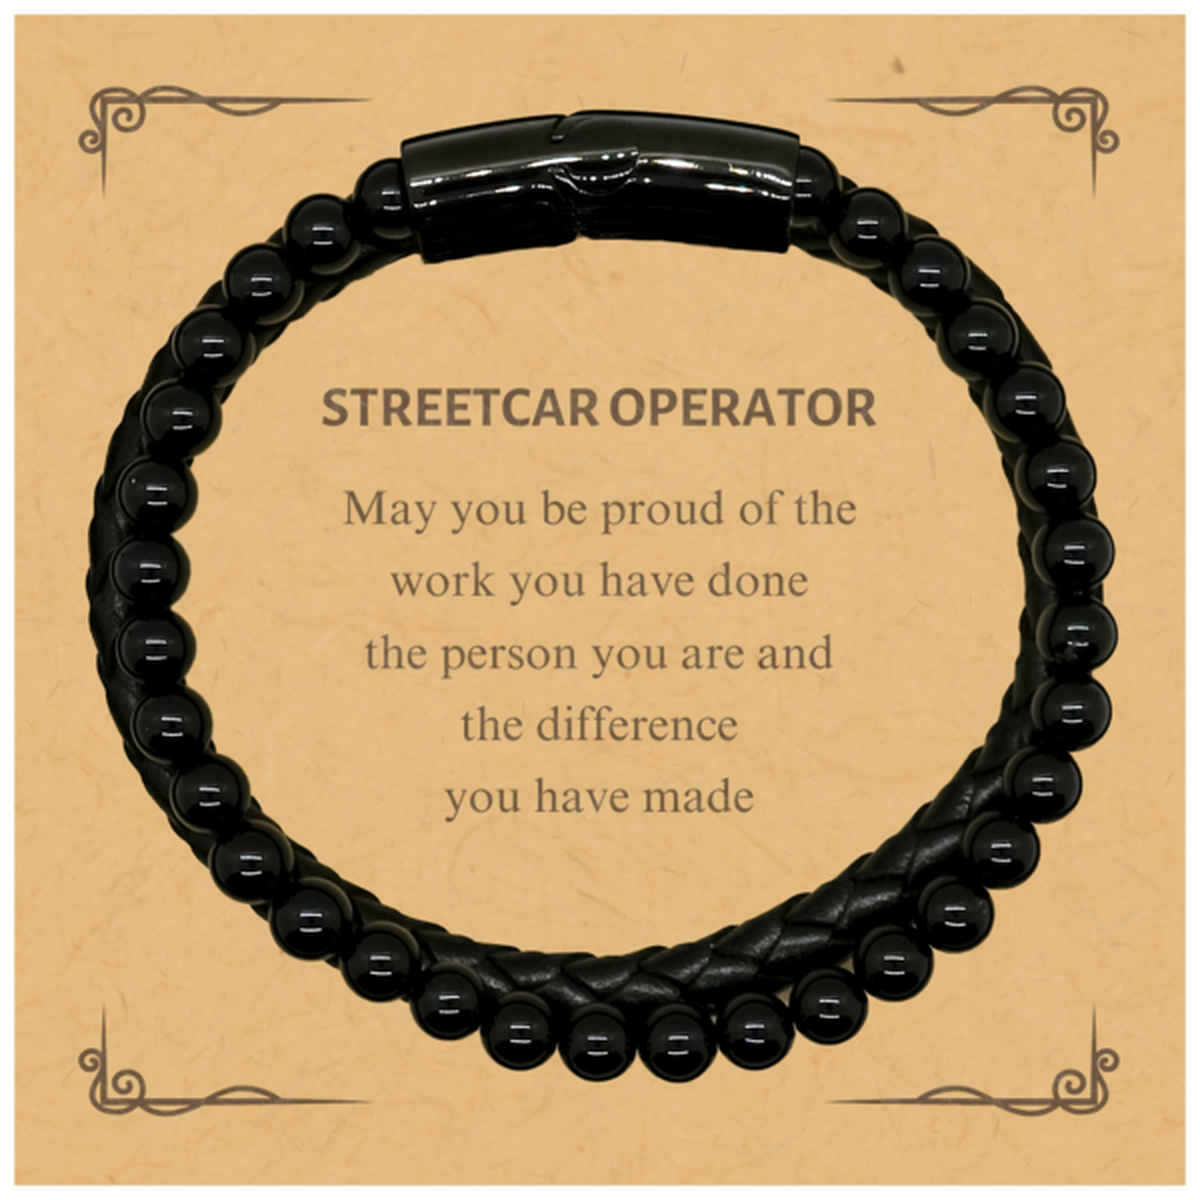 Streetcar Operator May you be proud of the work you have done, Retirement Streetcar Operator Stone Leather Bracelets for Colleague Appreciation Gifts Amazing for Streetcar Operator